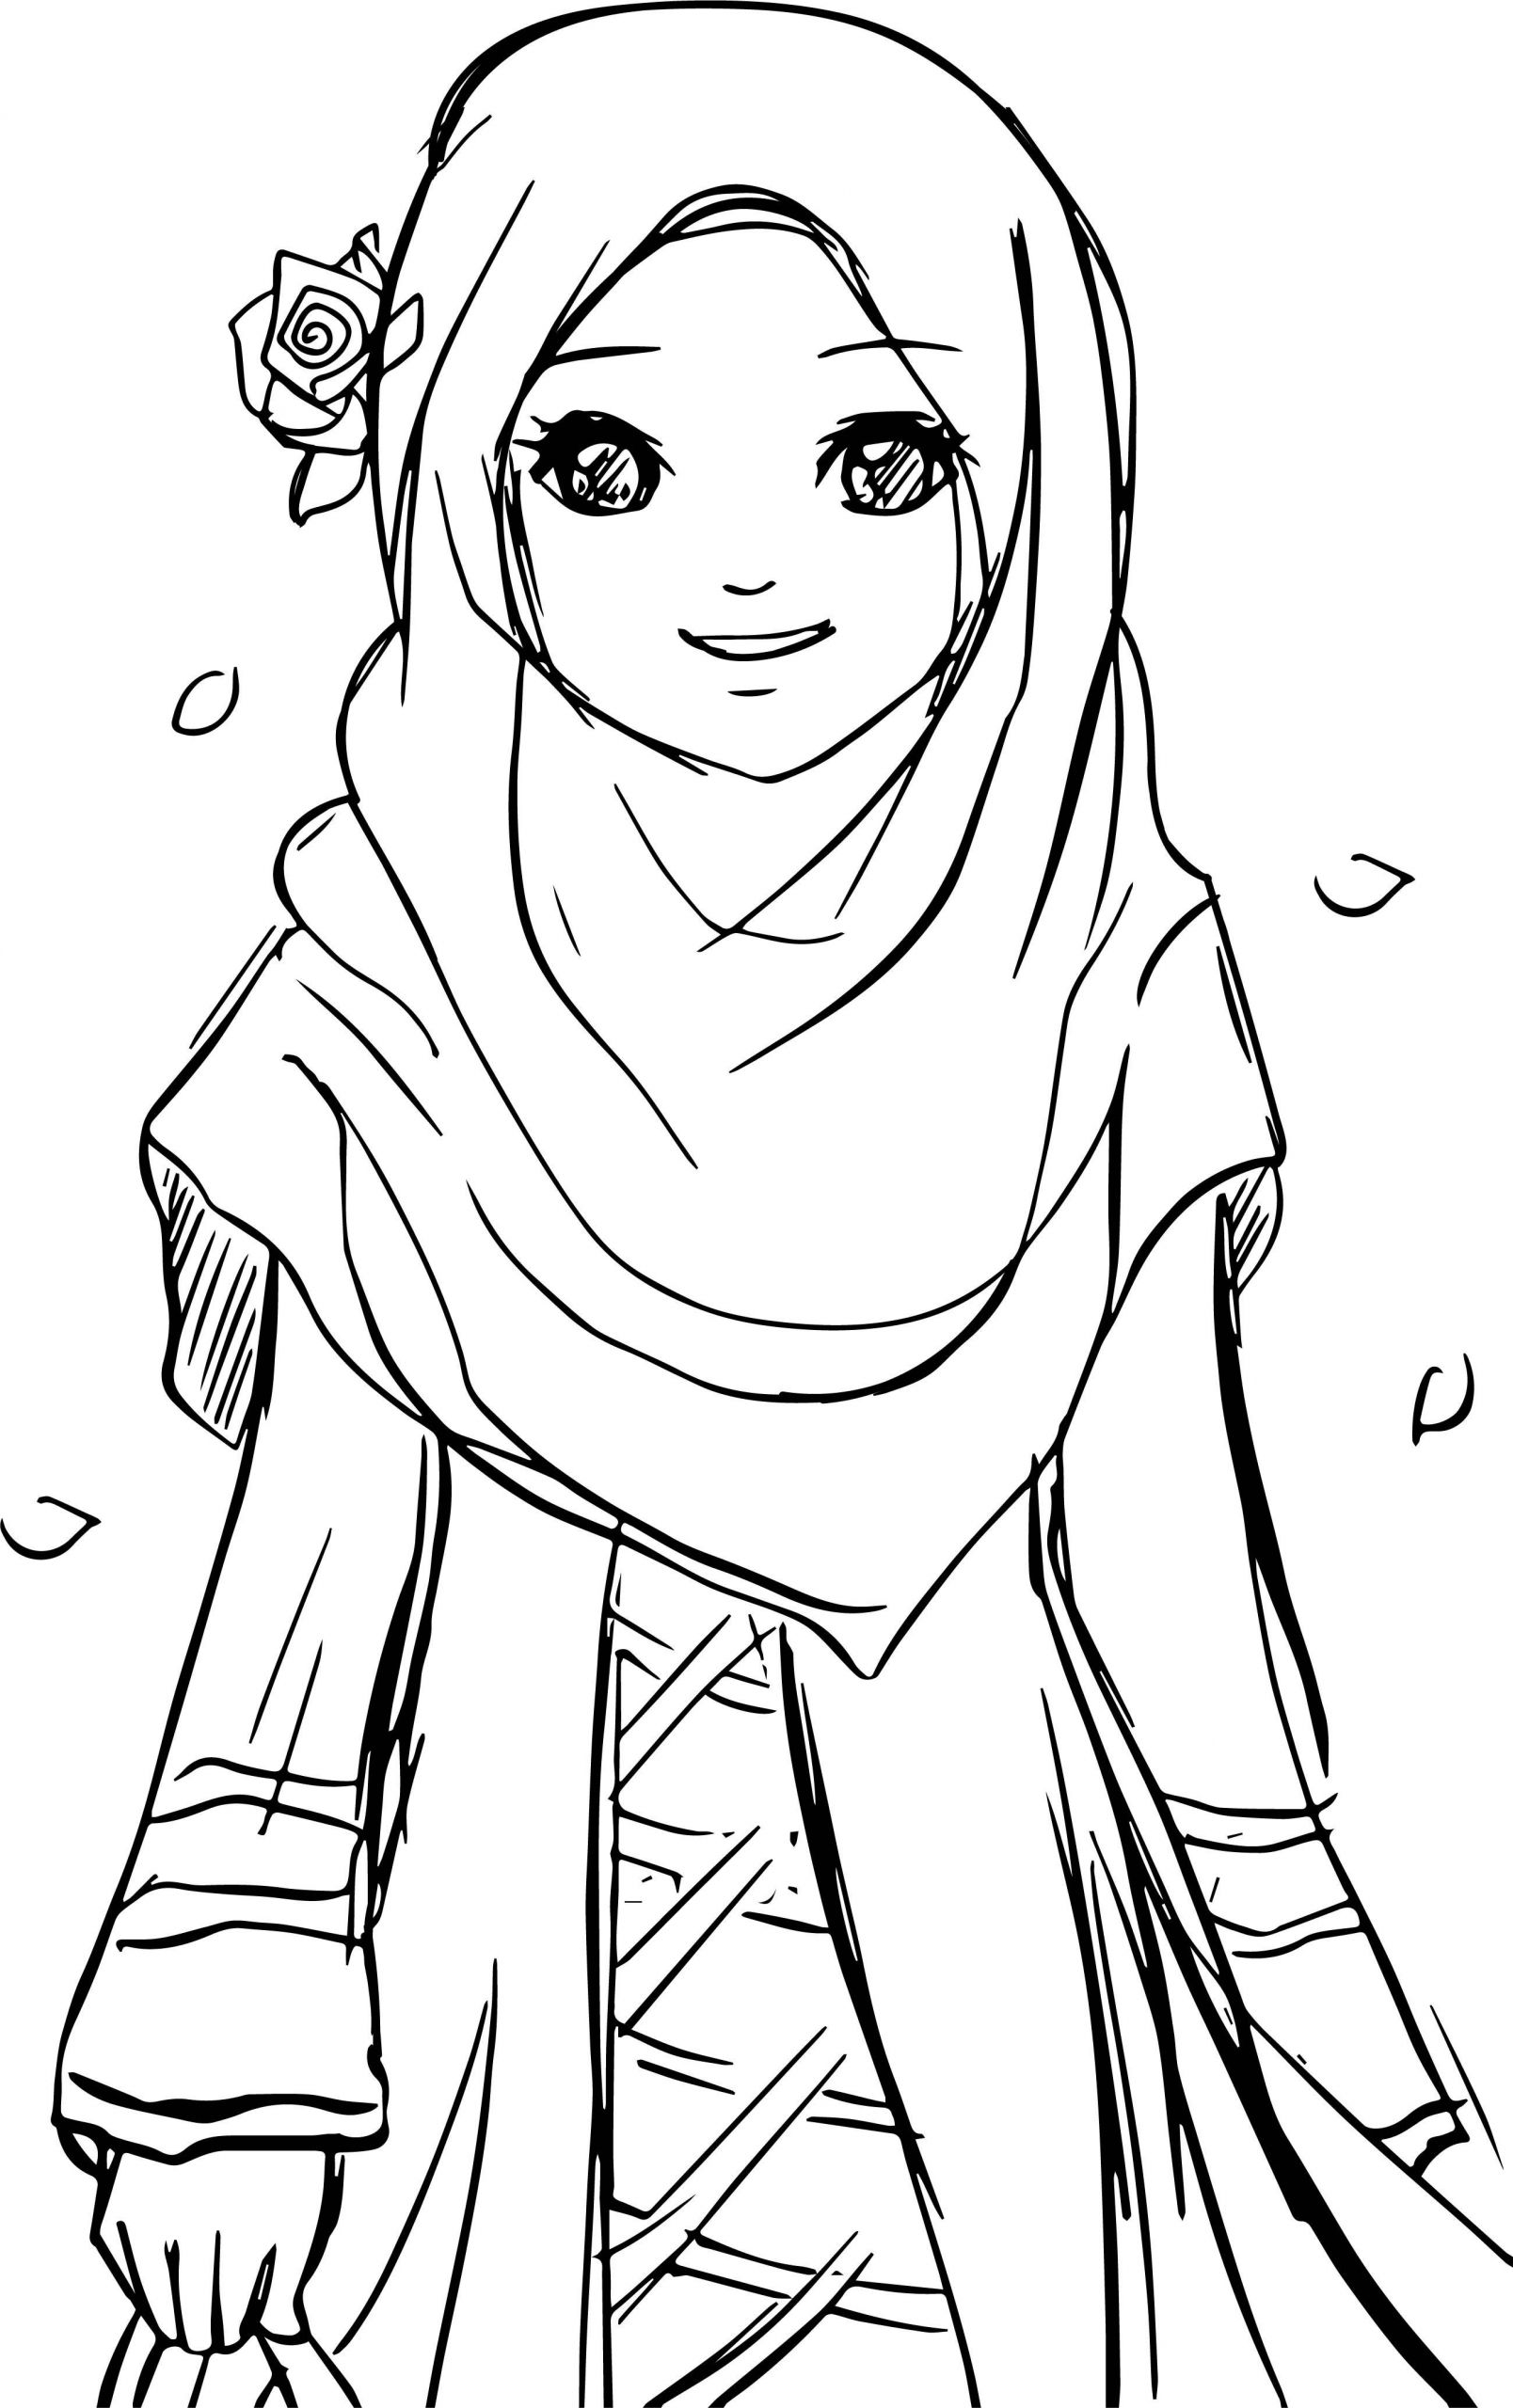 Girls Coloring Pages
 cool Islamic Muslim Wears Hijab Girl Coloring Pages